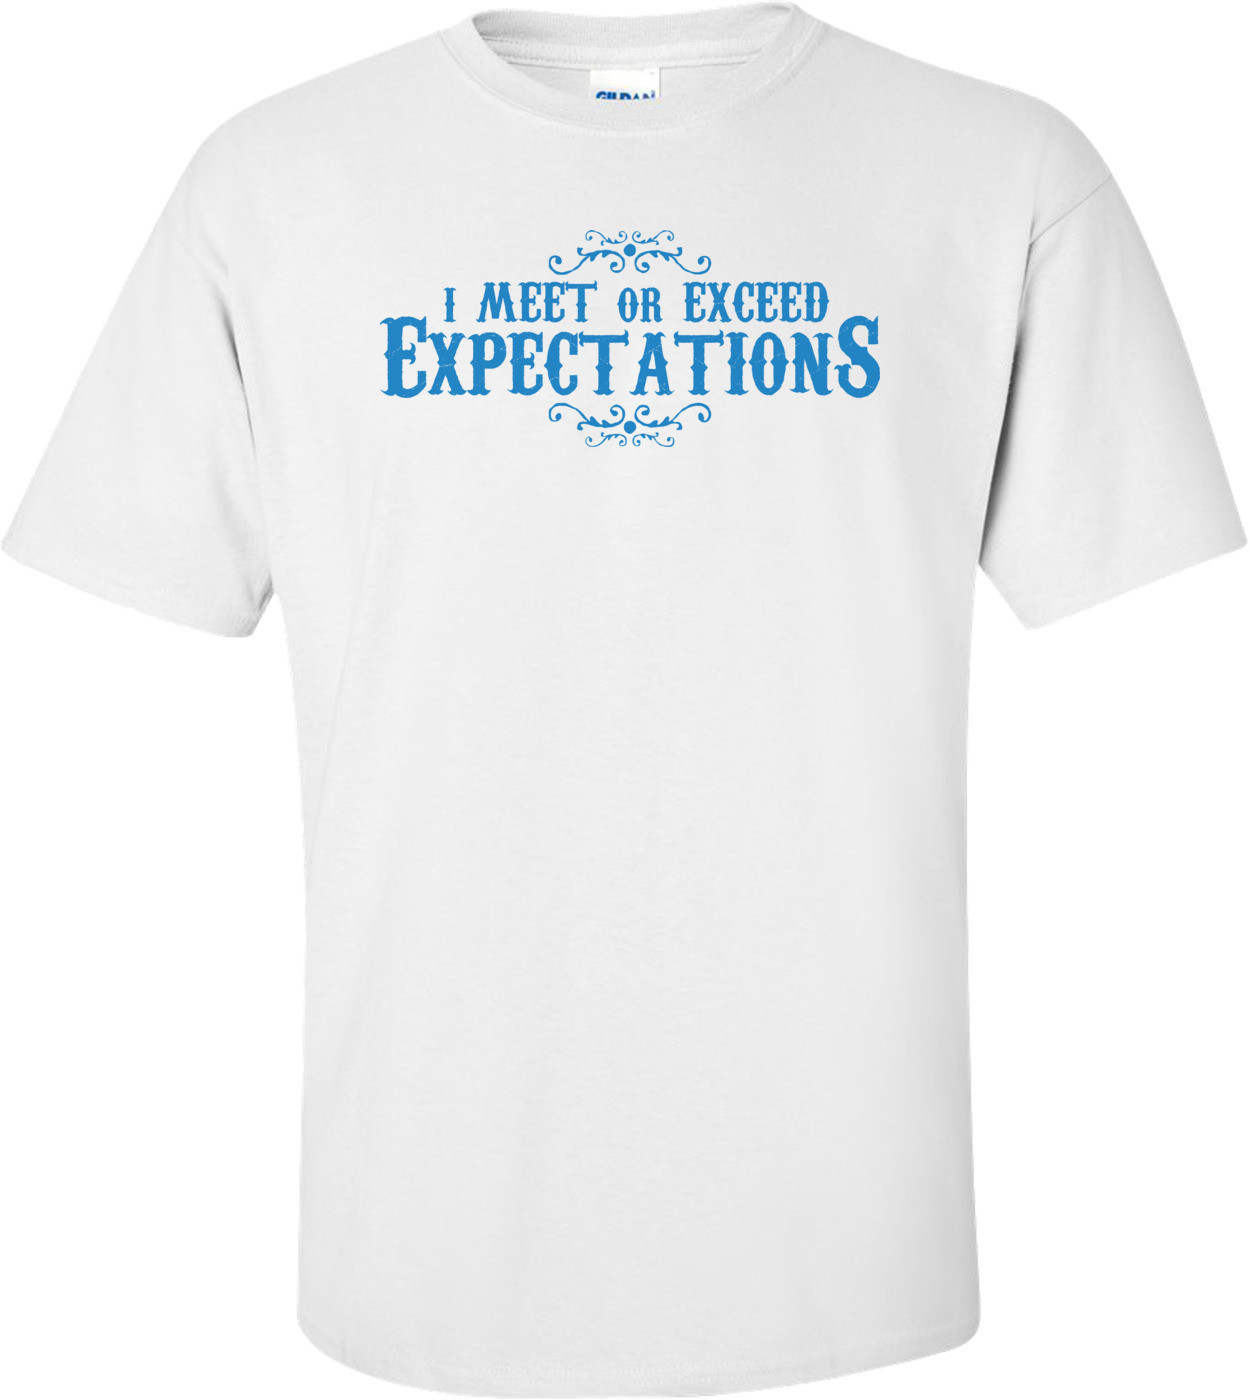 I Meet Or Exceed Expectations T-shirt 